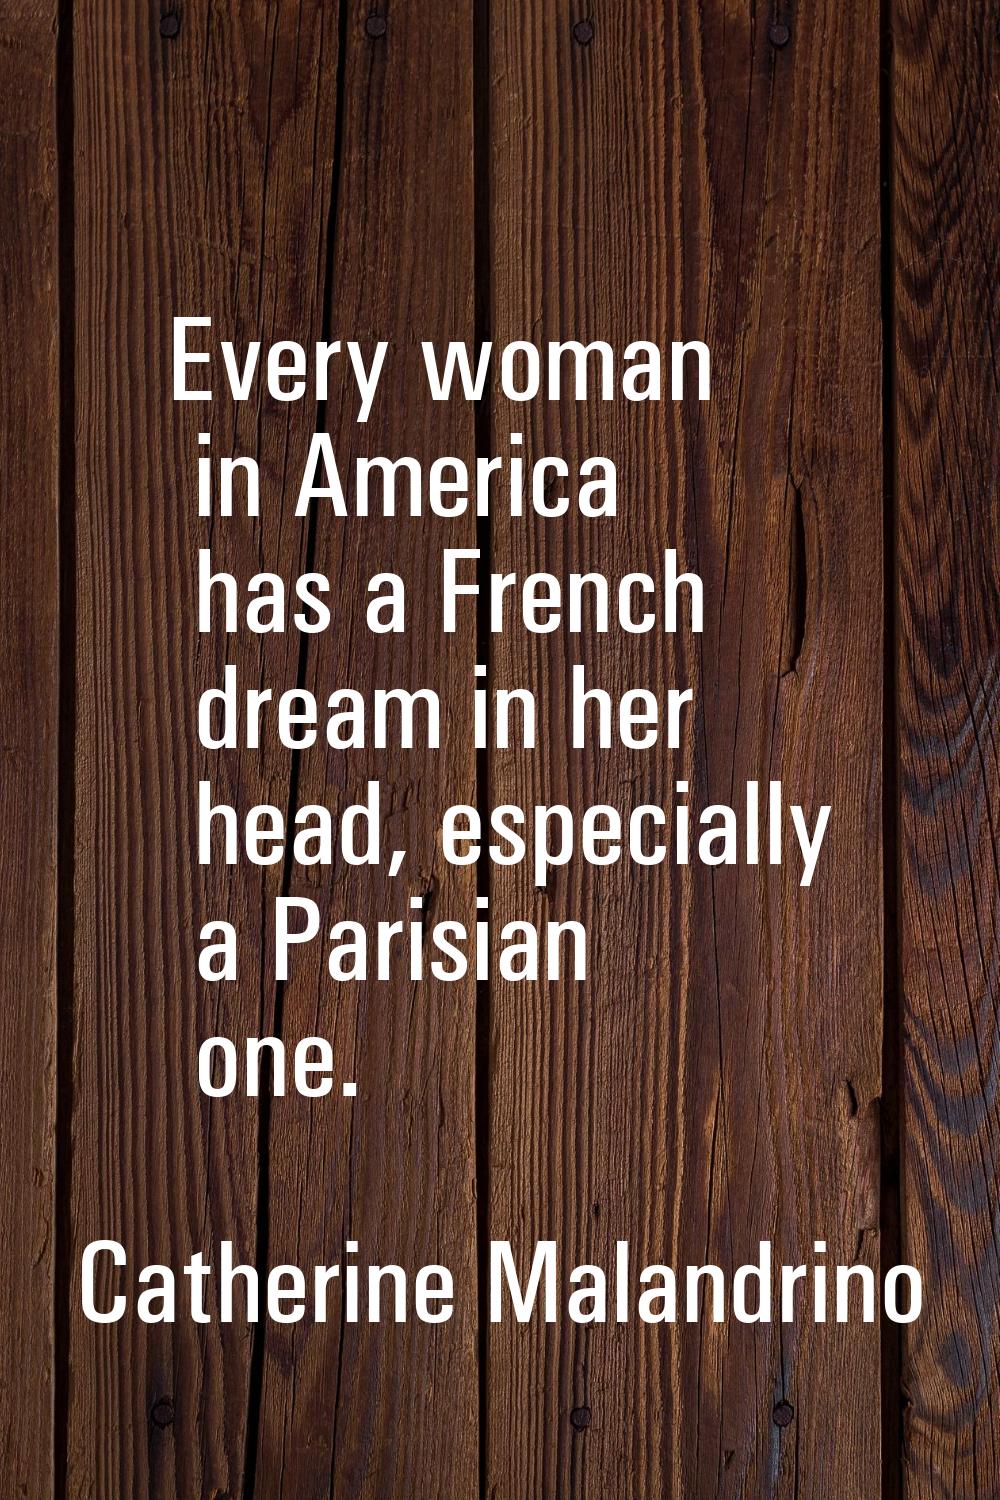 Every woman in America has a French dream in her head, especially a Parisian one.